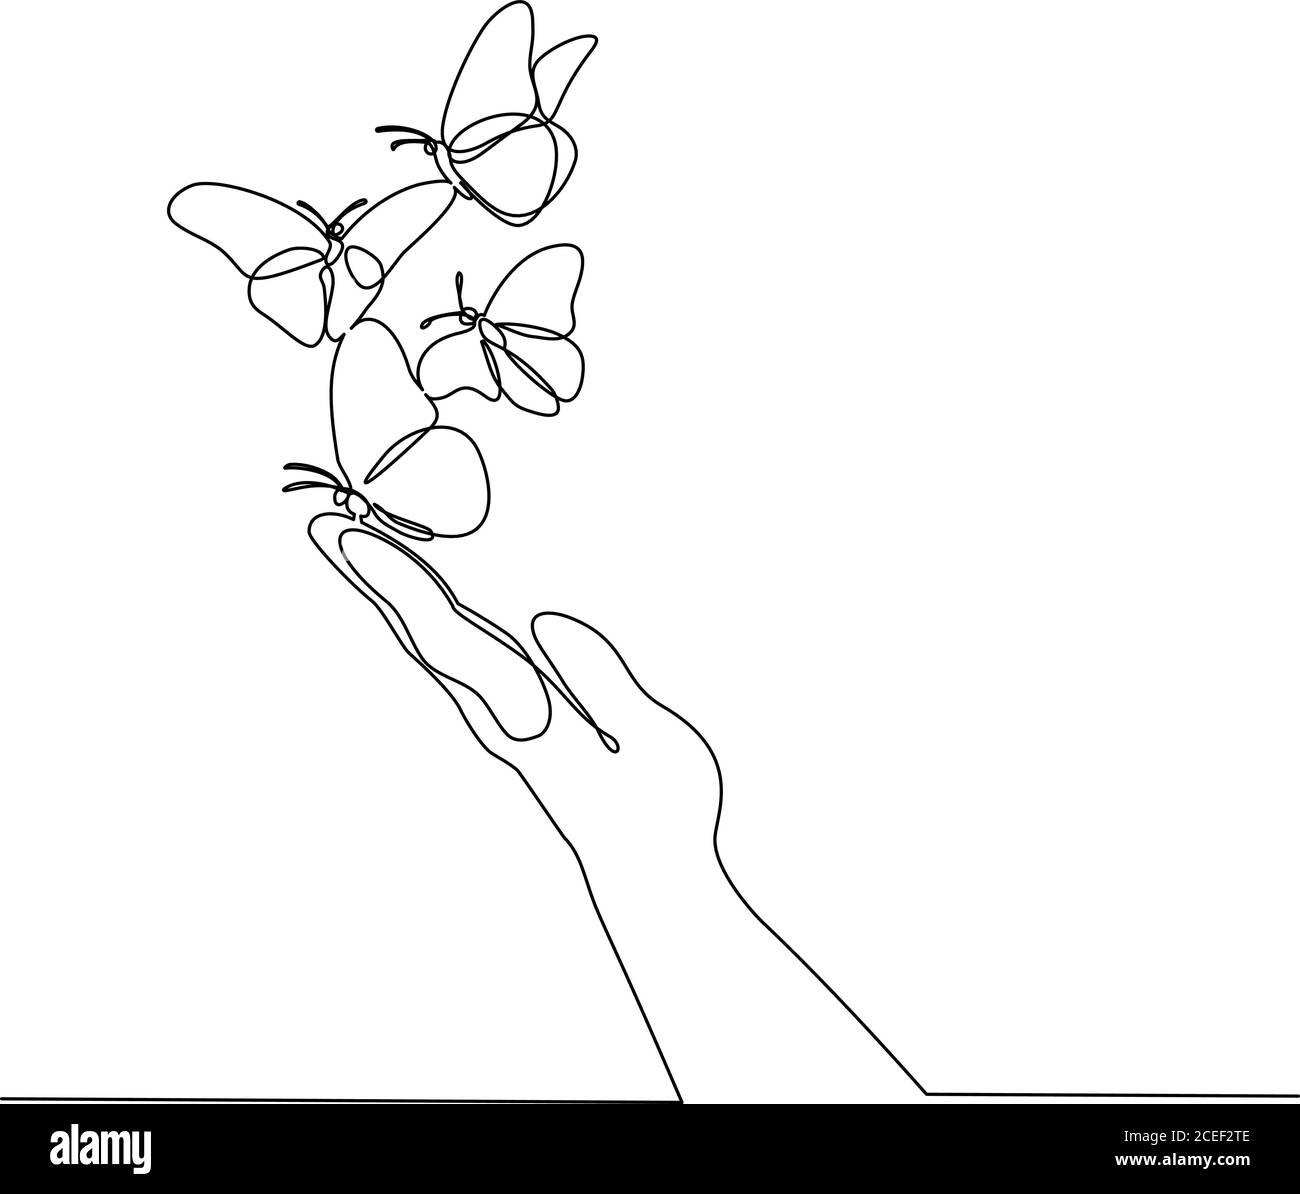 102,829 Flower line drawing Vector Images | Depositphotos